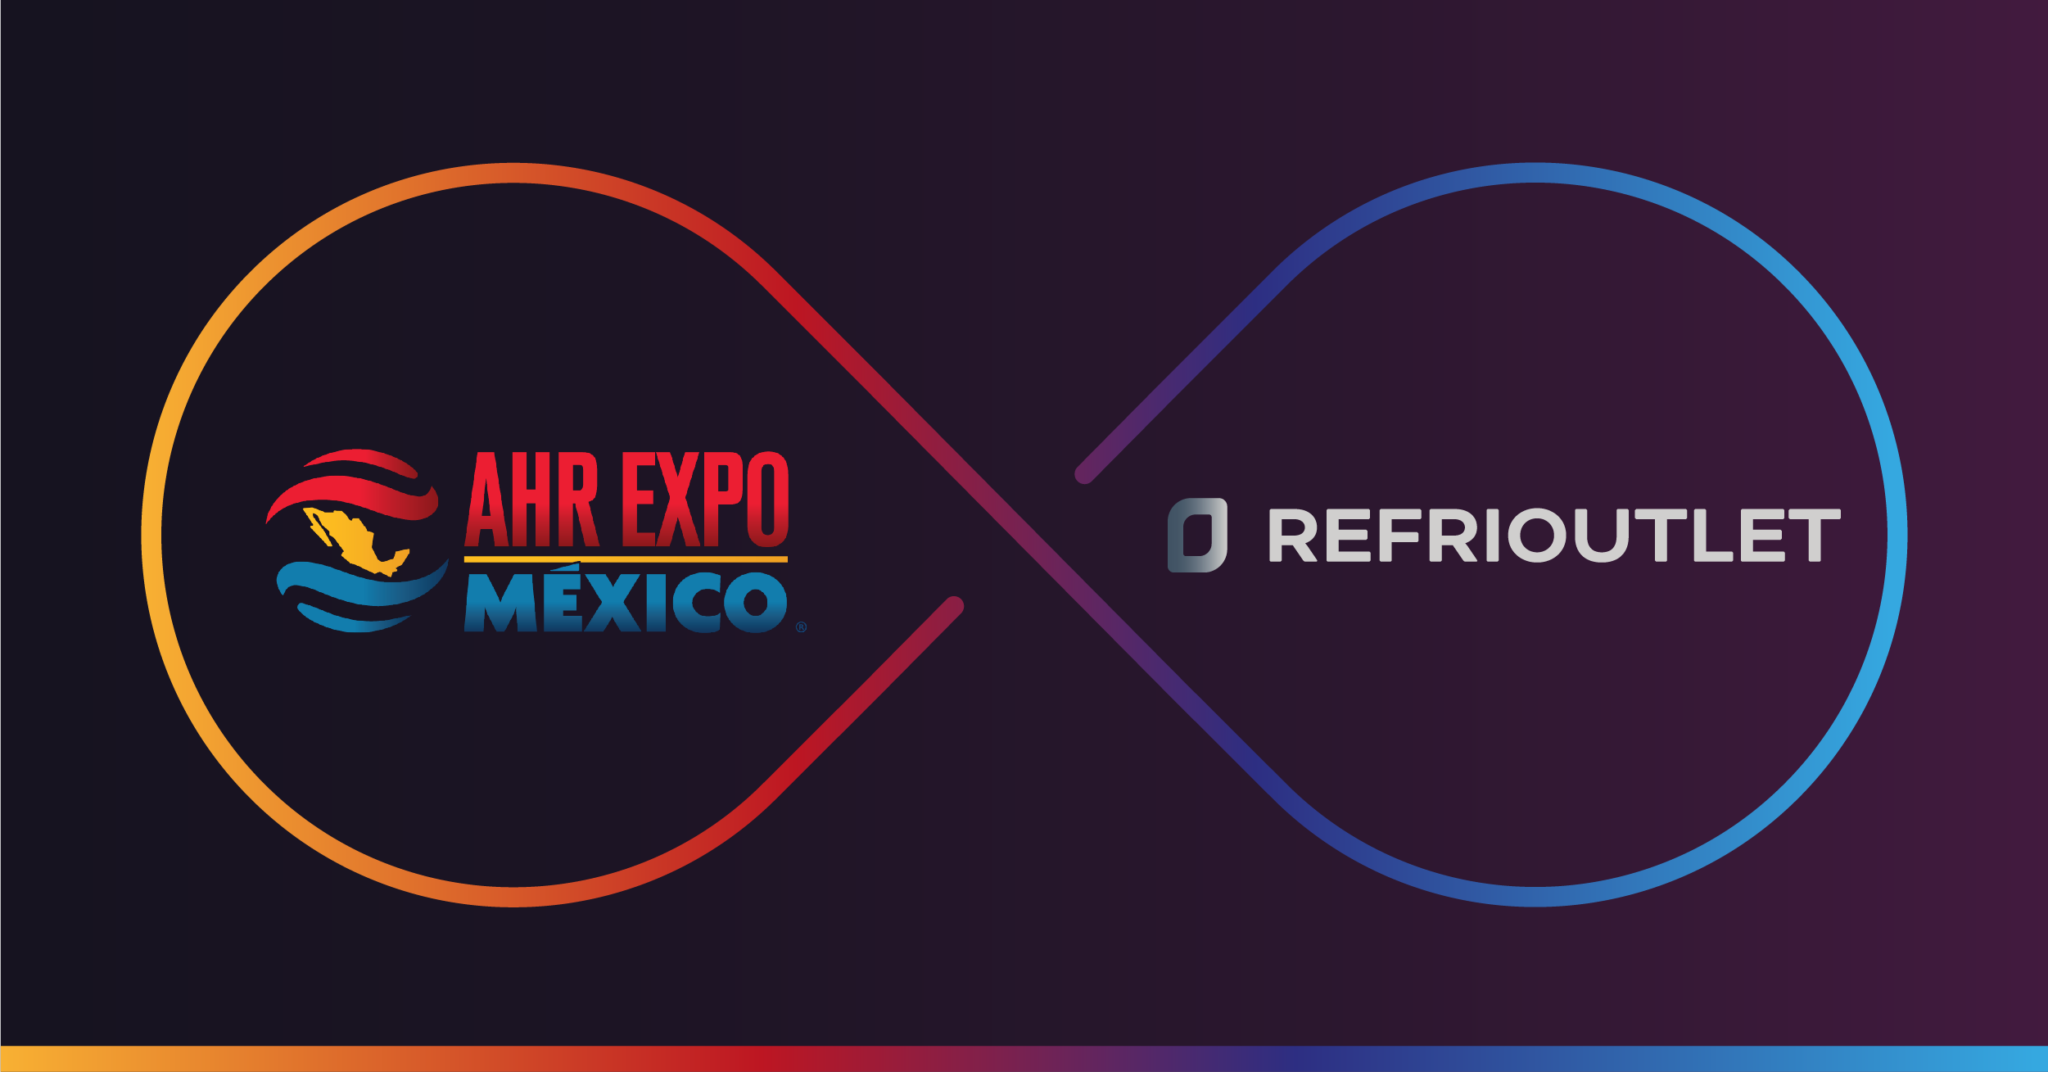 Meet Refrioutlet at AHR Expo 2021 in Mexico